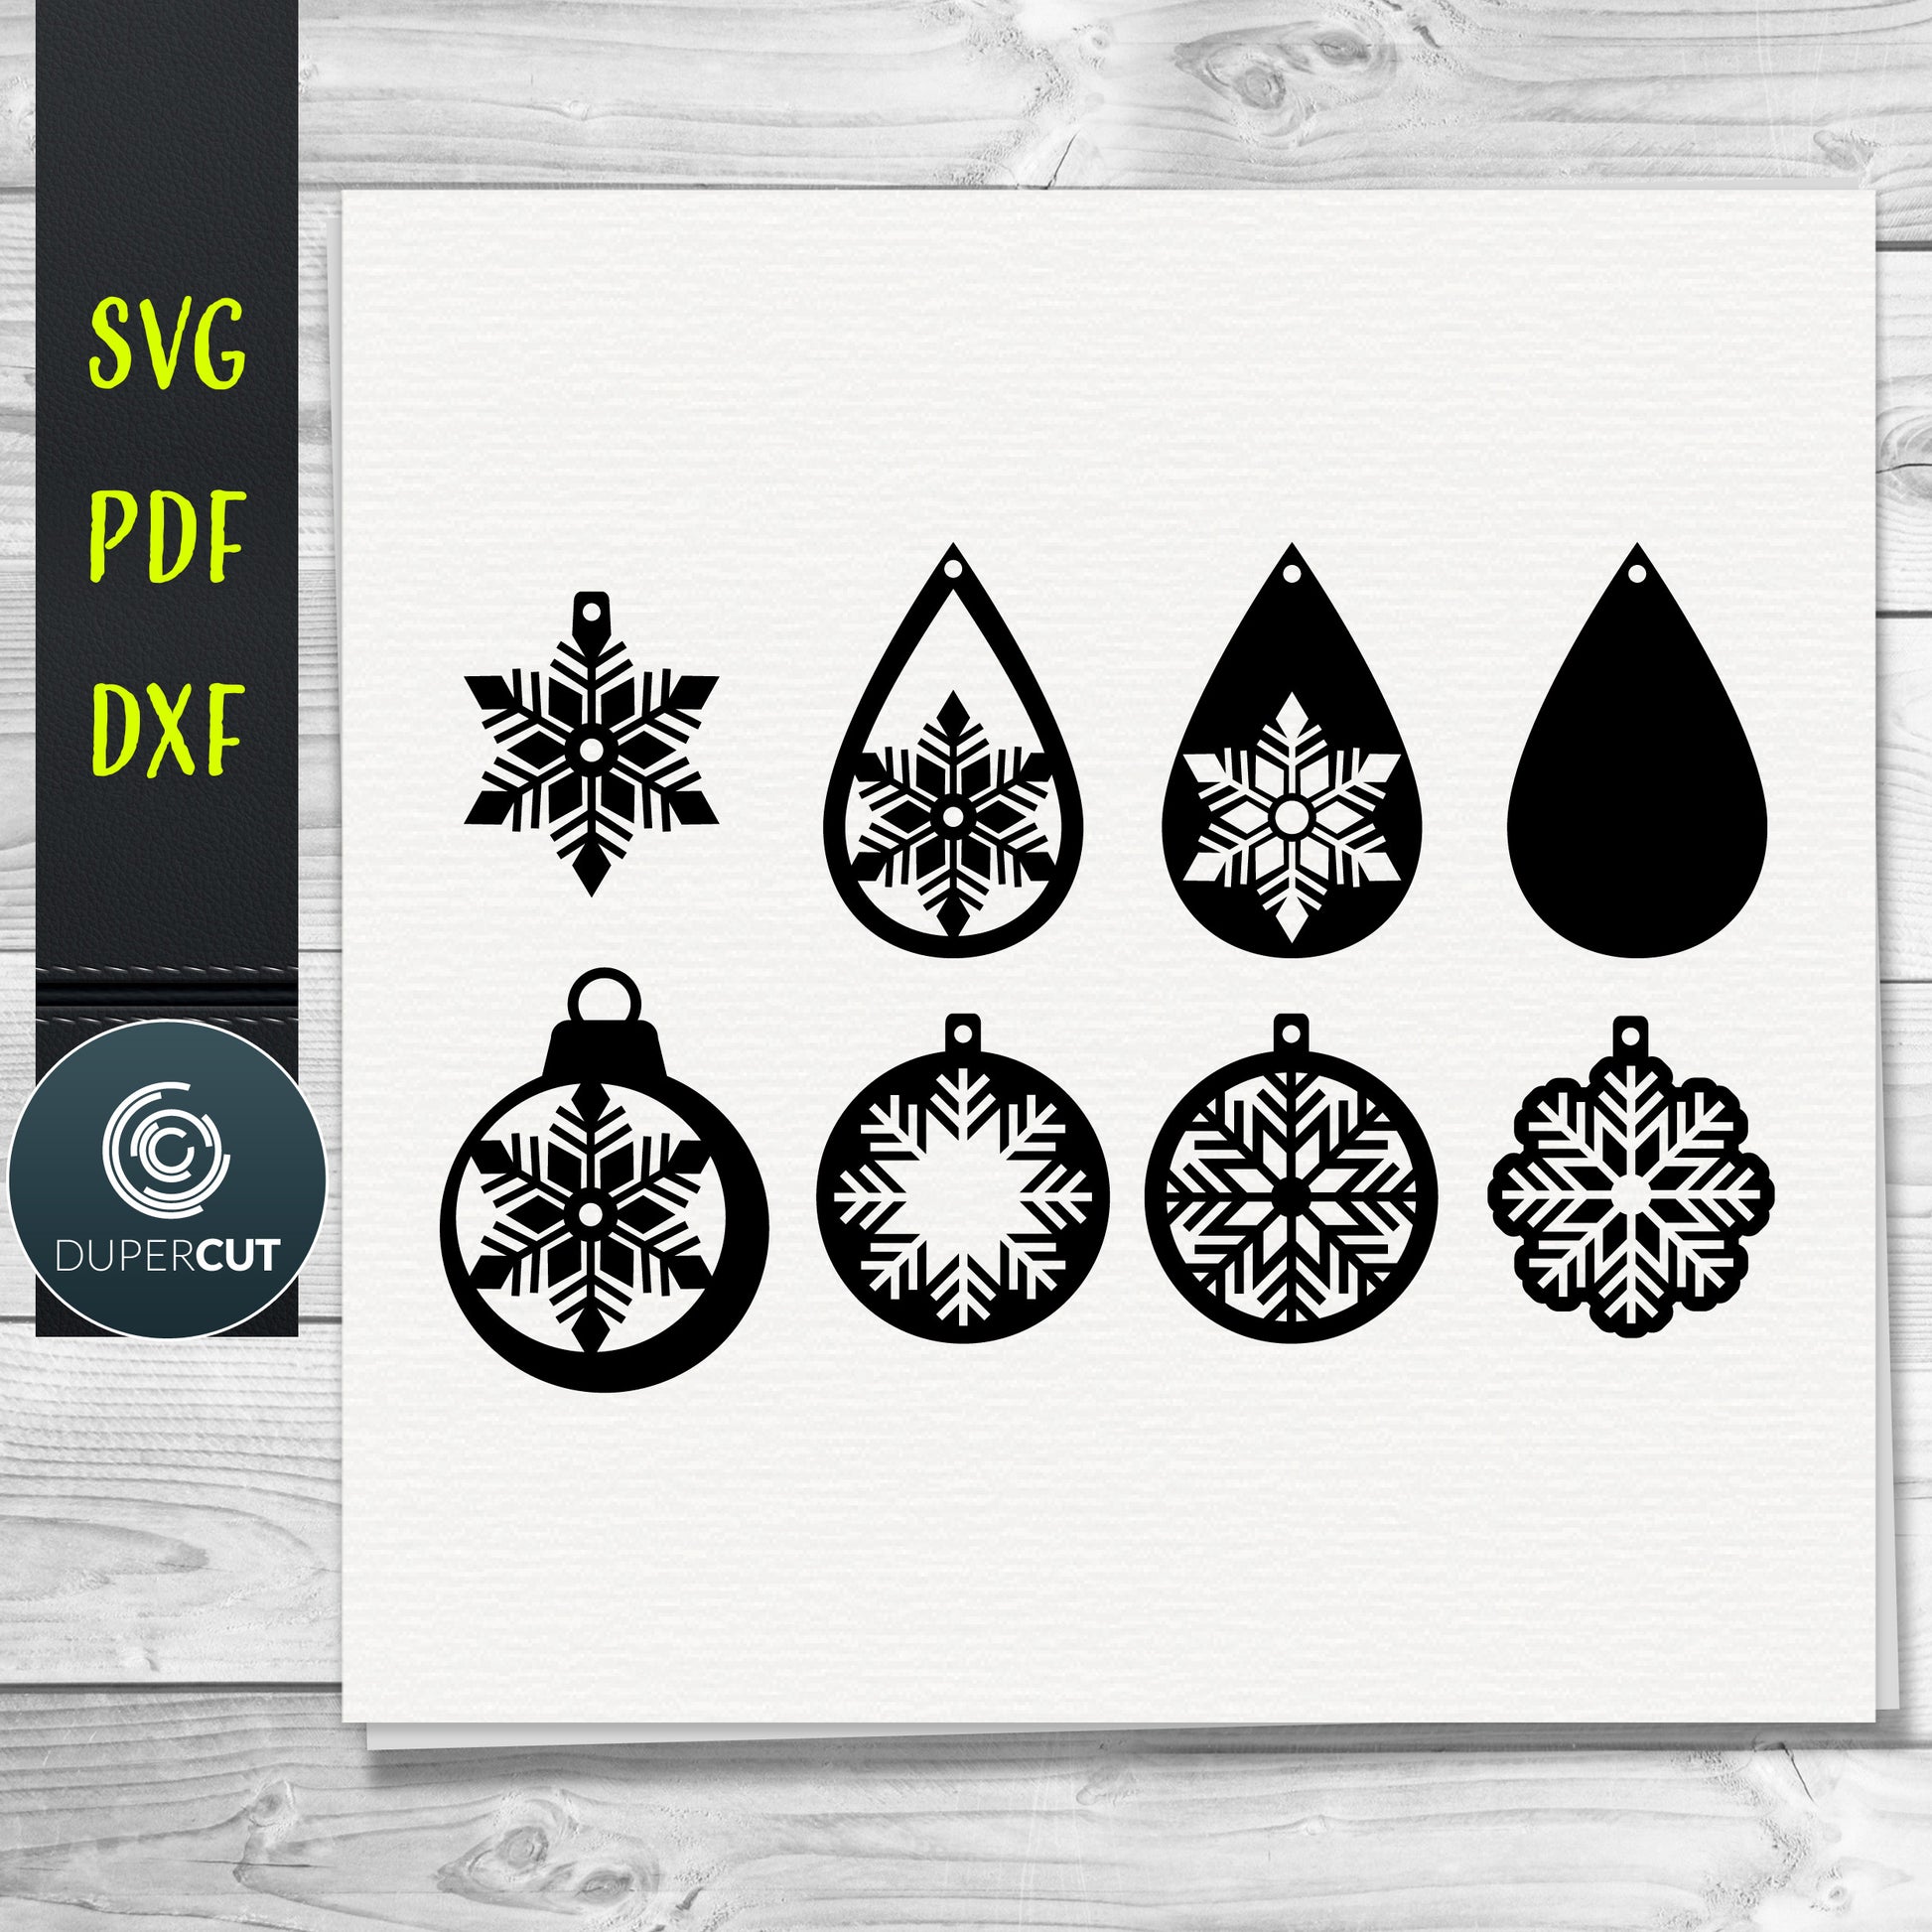 Snowflakes Layered Leather Earrings SVG PDF DXF vector files. Jewellery making template for laser and cutting machines - Glowforge, Cricut, Silhouette Cameo.